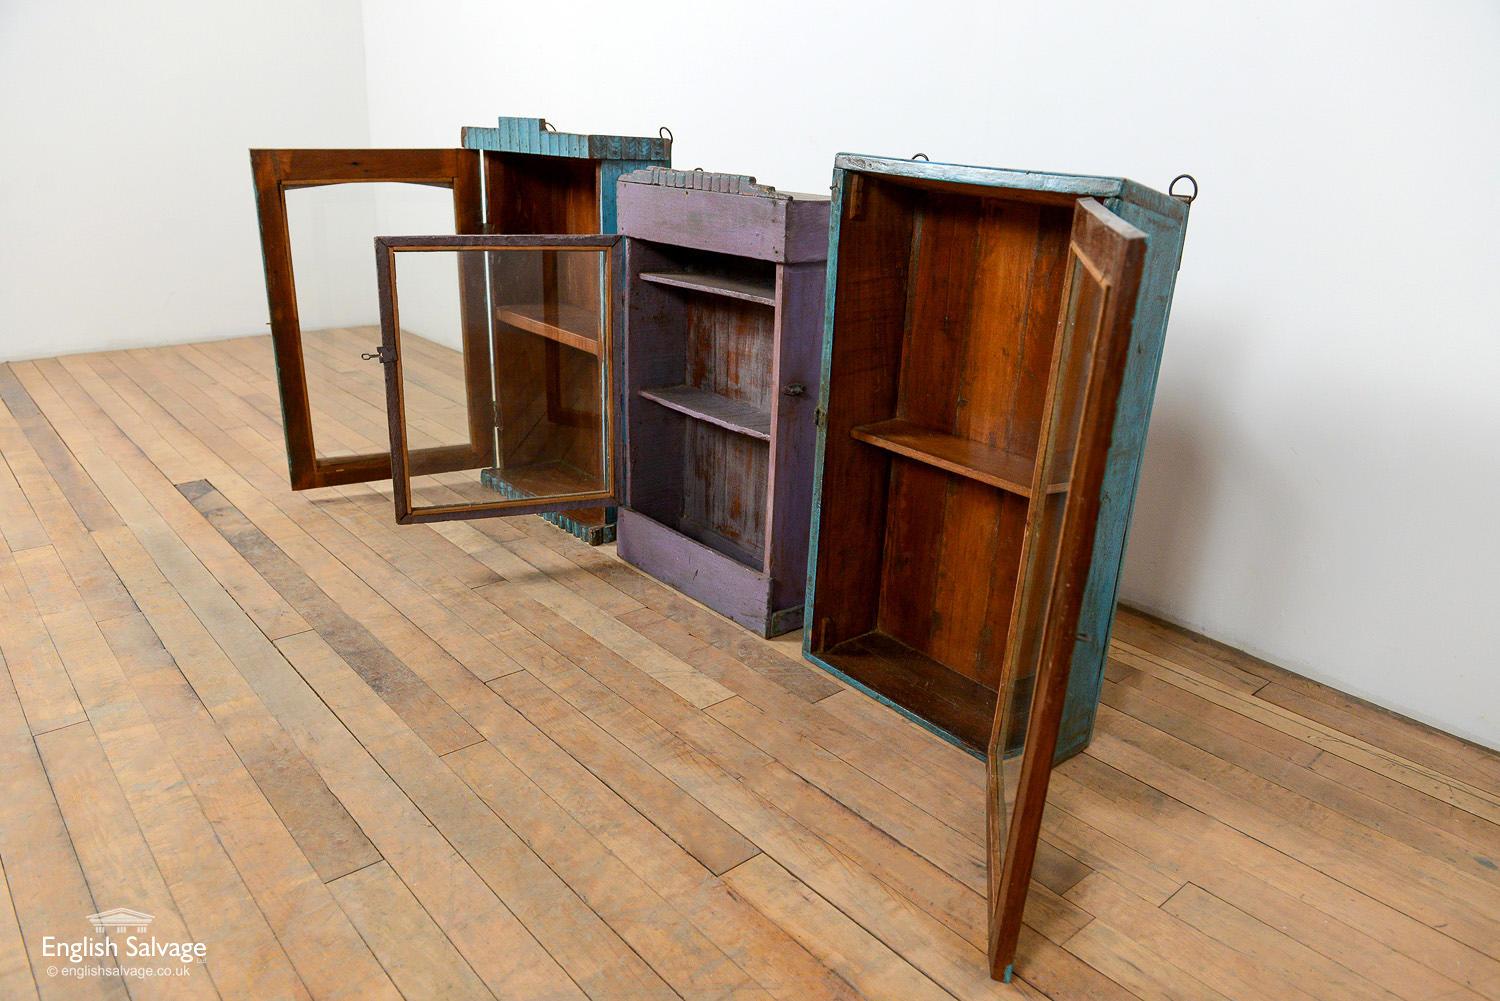 Painted Wooden Wall Mounted Display Cabinets, 20th Century In Good Condition For Sale In London, GB